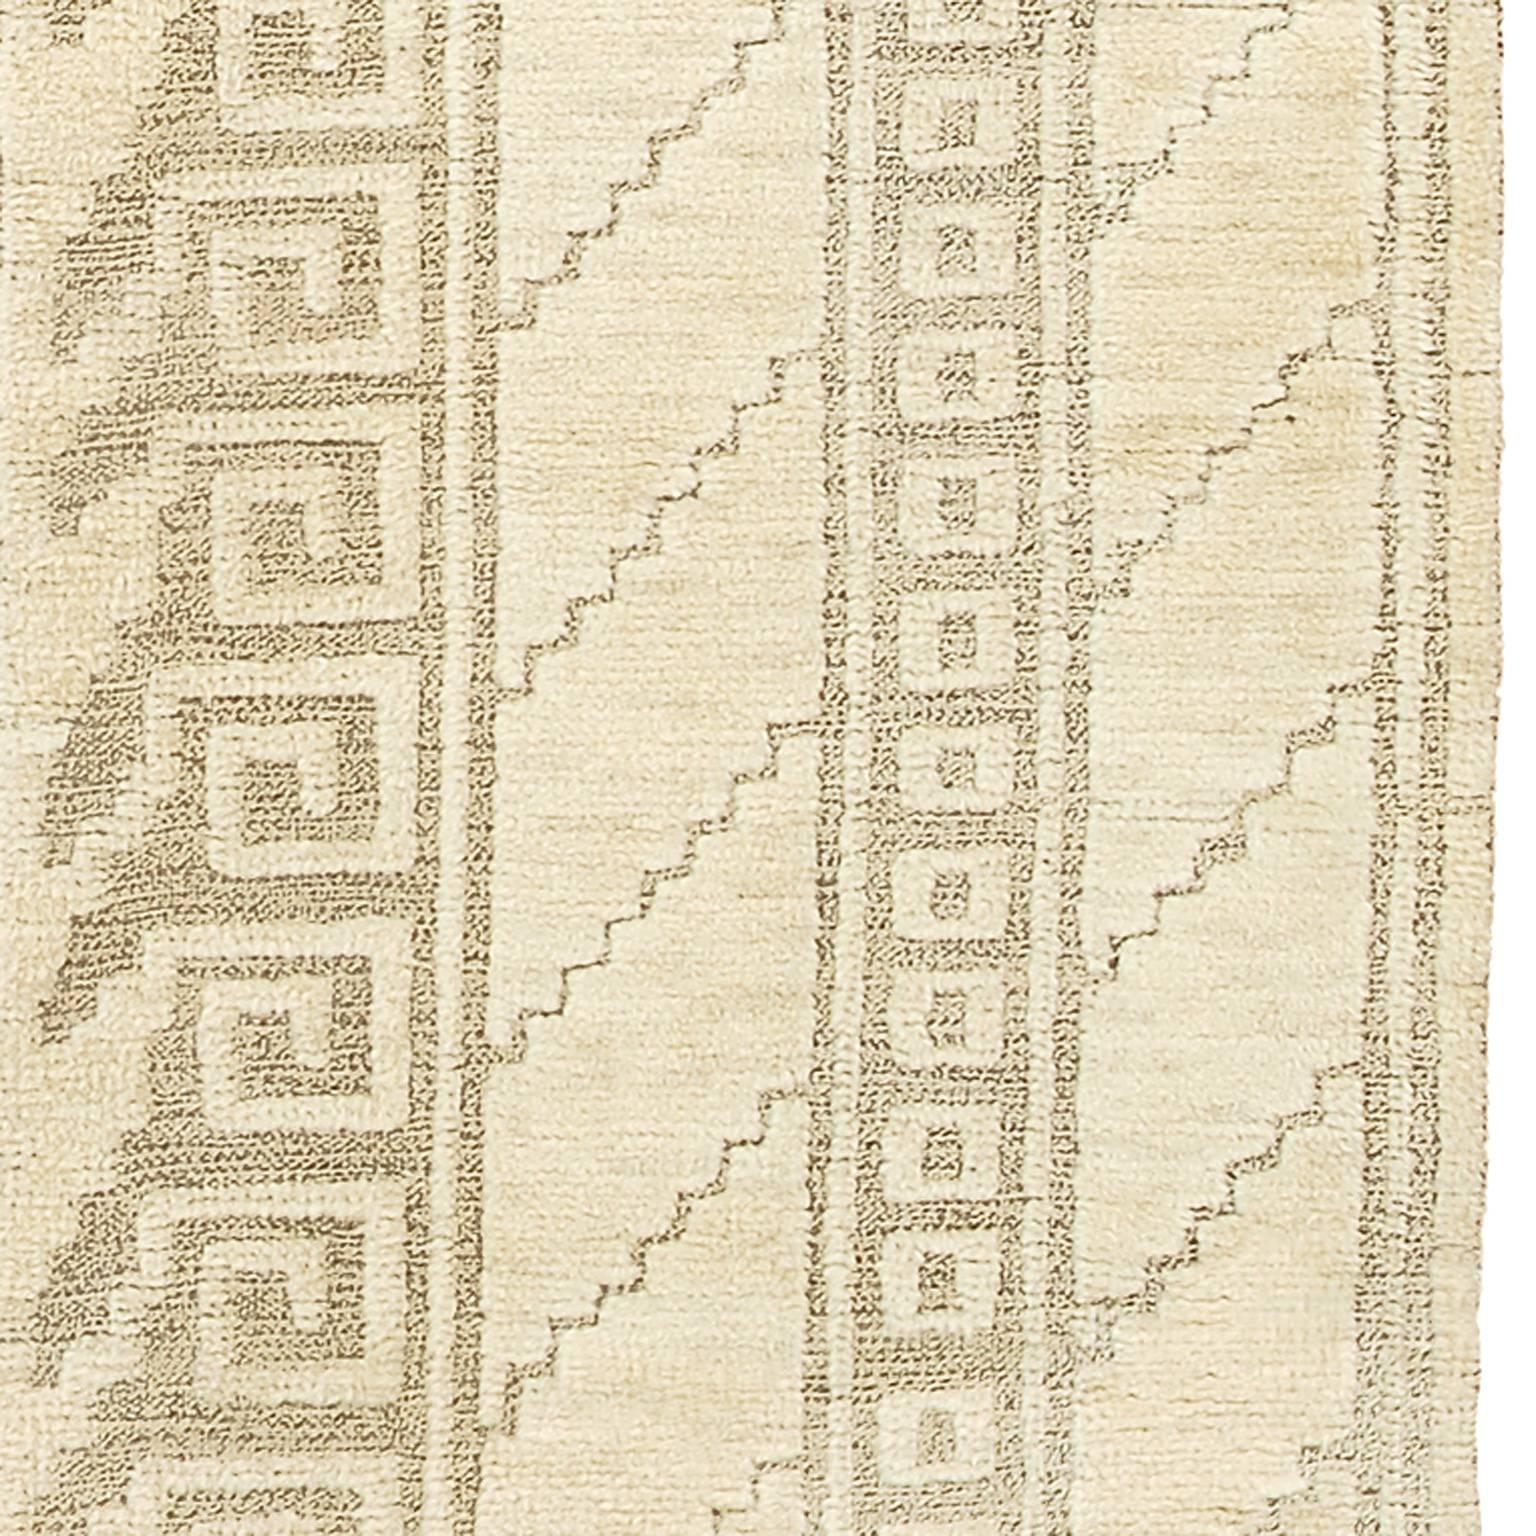 Hand-Woven Marta Maas-Fjetterström 'White Pointed Arch', Sweden, 1940s For Sale